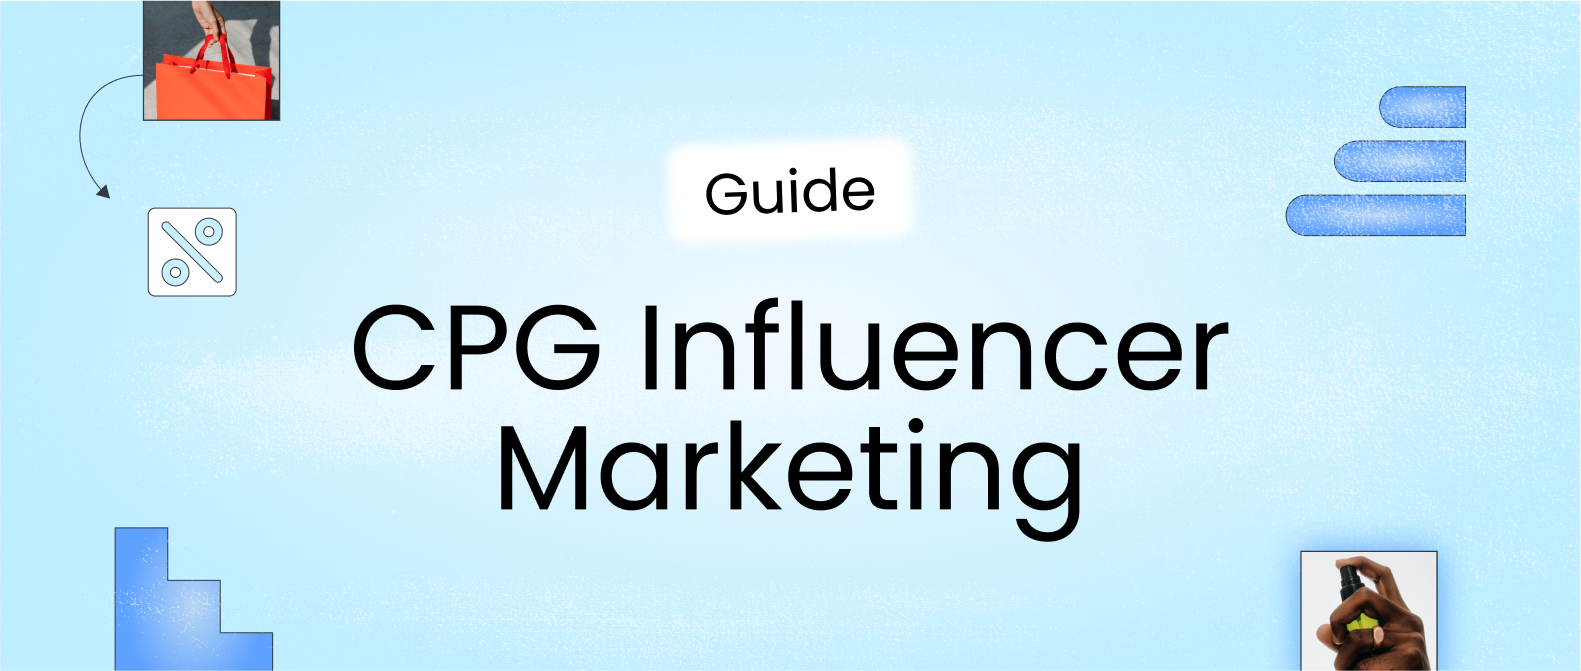 Free influencer marketing guide for consumer packaged goods brands.